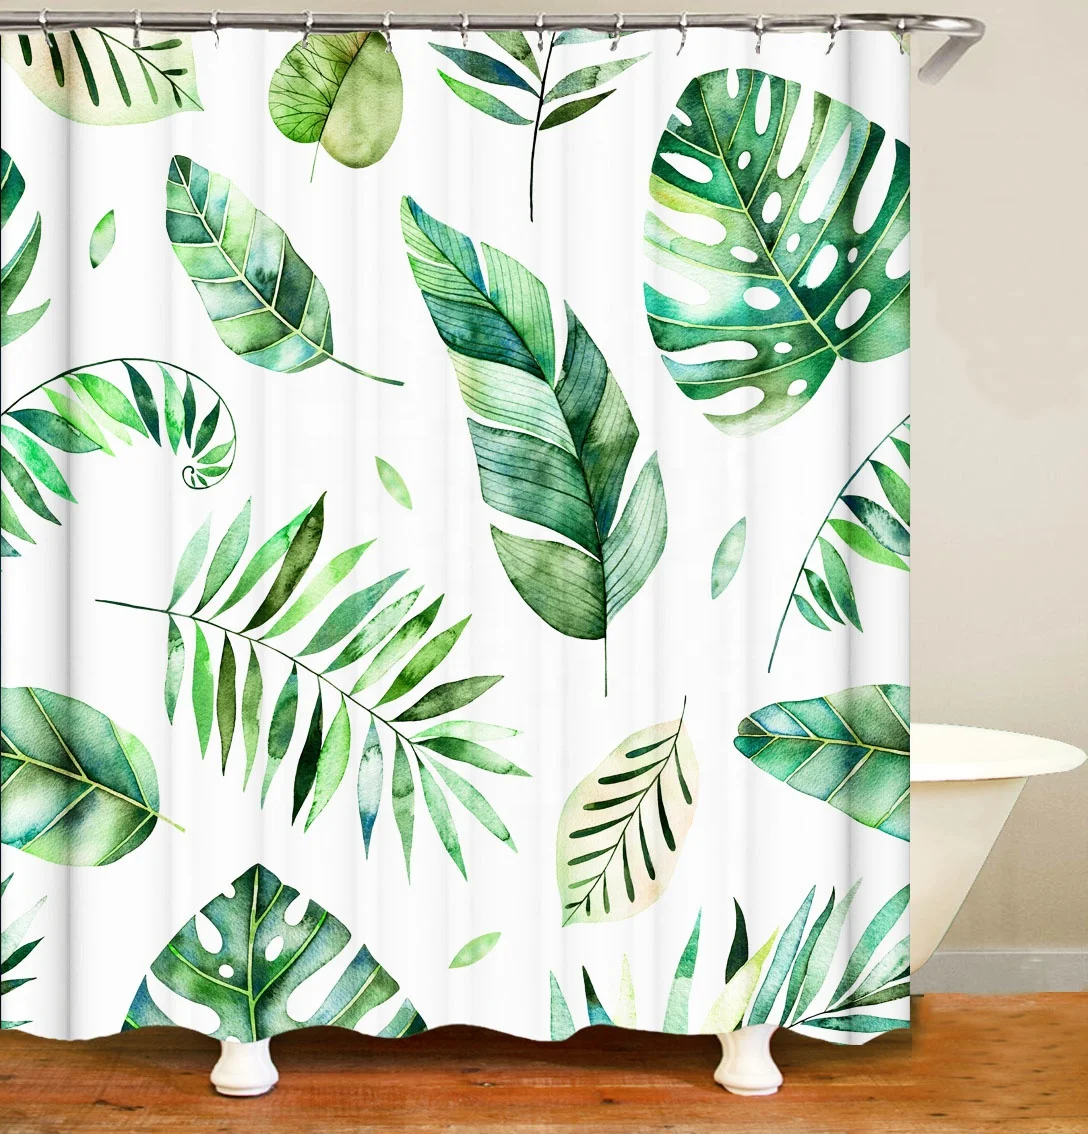 

i@home green leaves print tropical 3d polyester shower curtain bathroom mildew resistant waterproof, As picture show